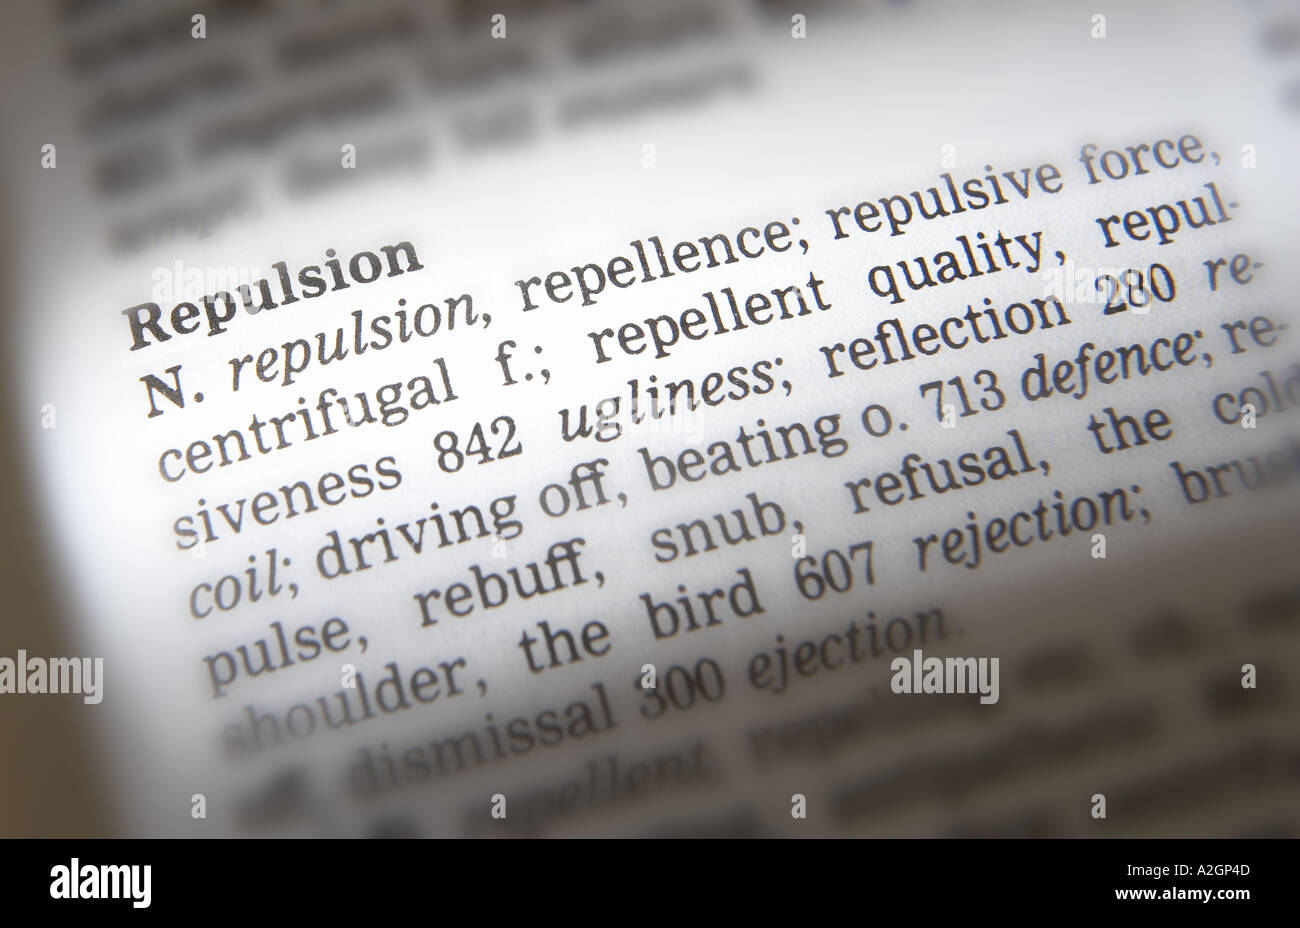 THESAURUS PAGE SHOWING DEFINITION OF WORD REPULSION Stock Photo - Alamy